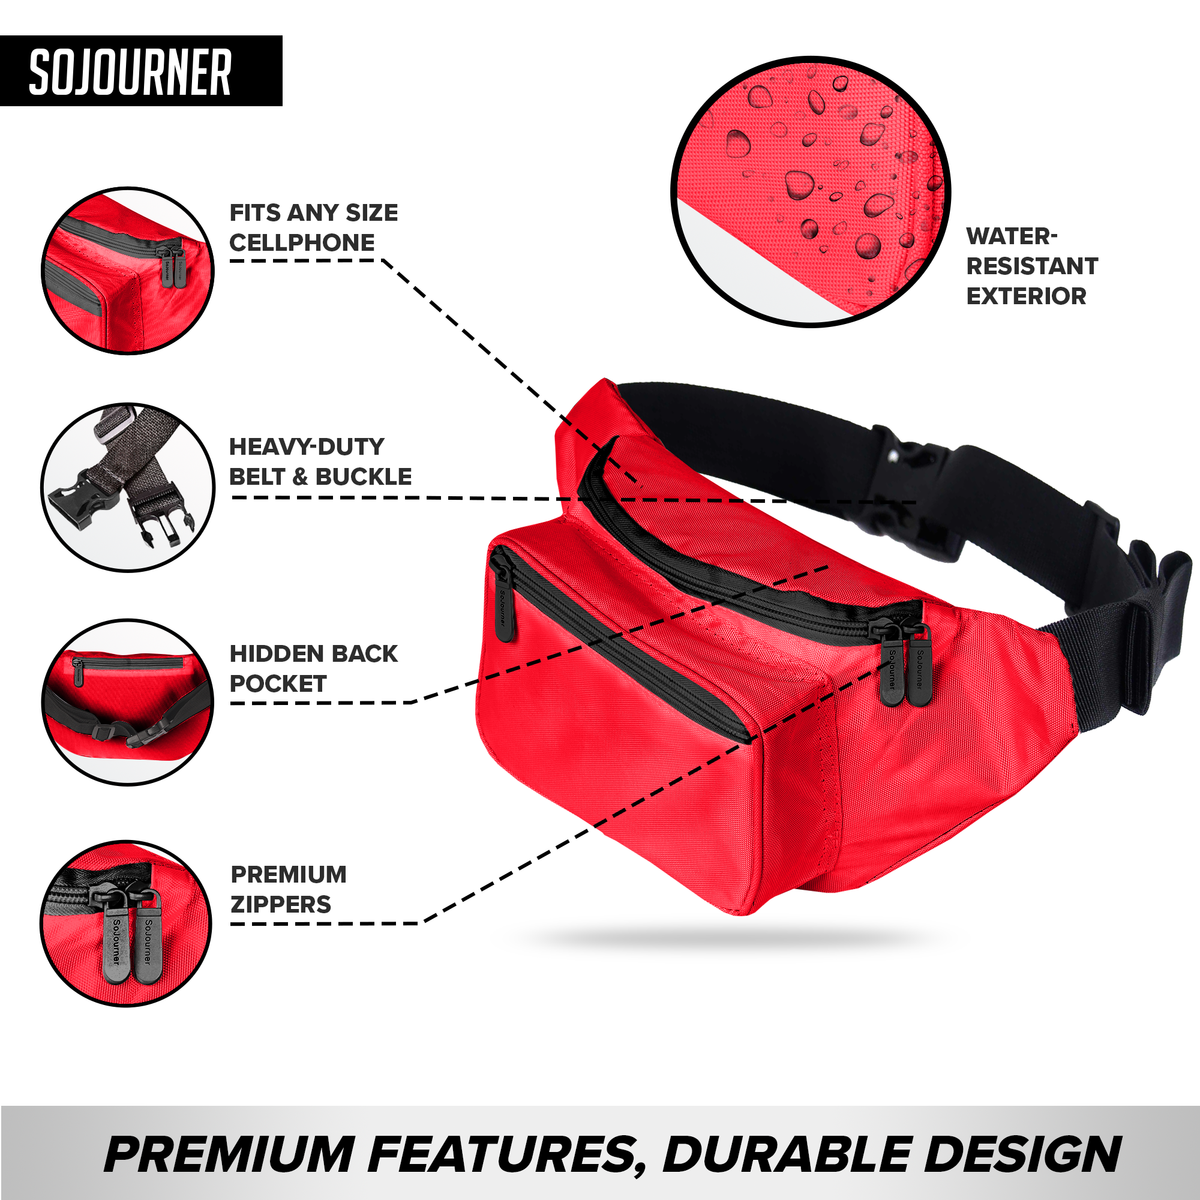 Solid Color Fanny Pack (Red)